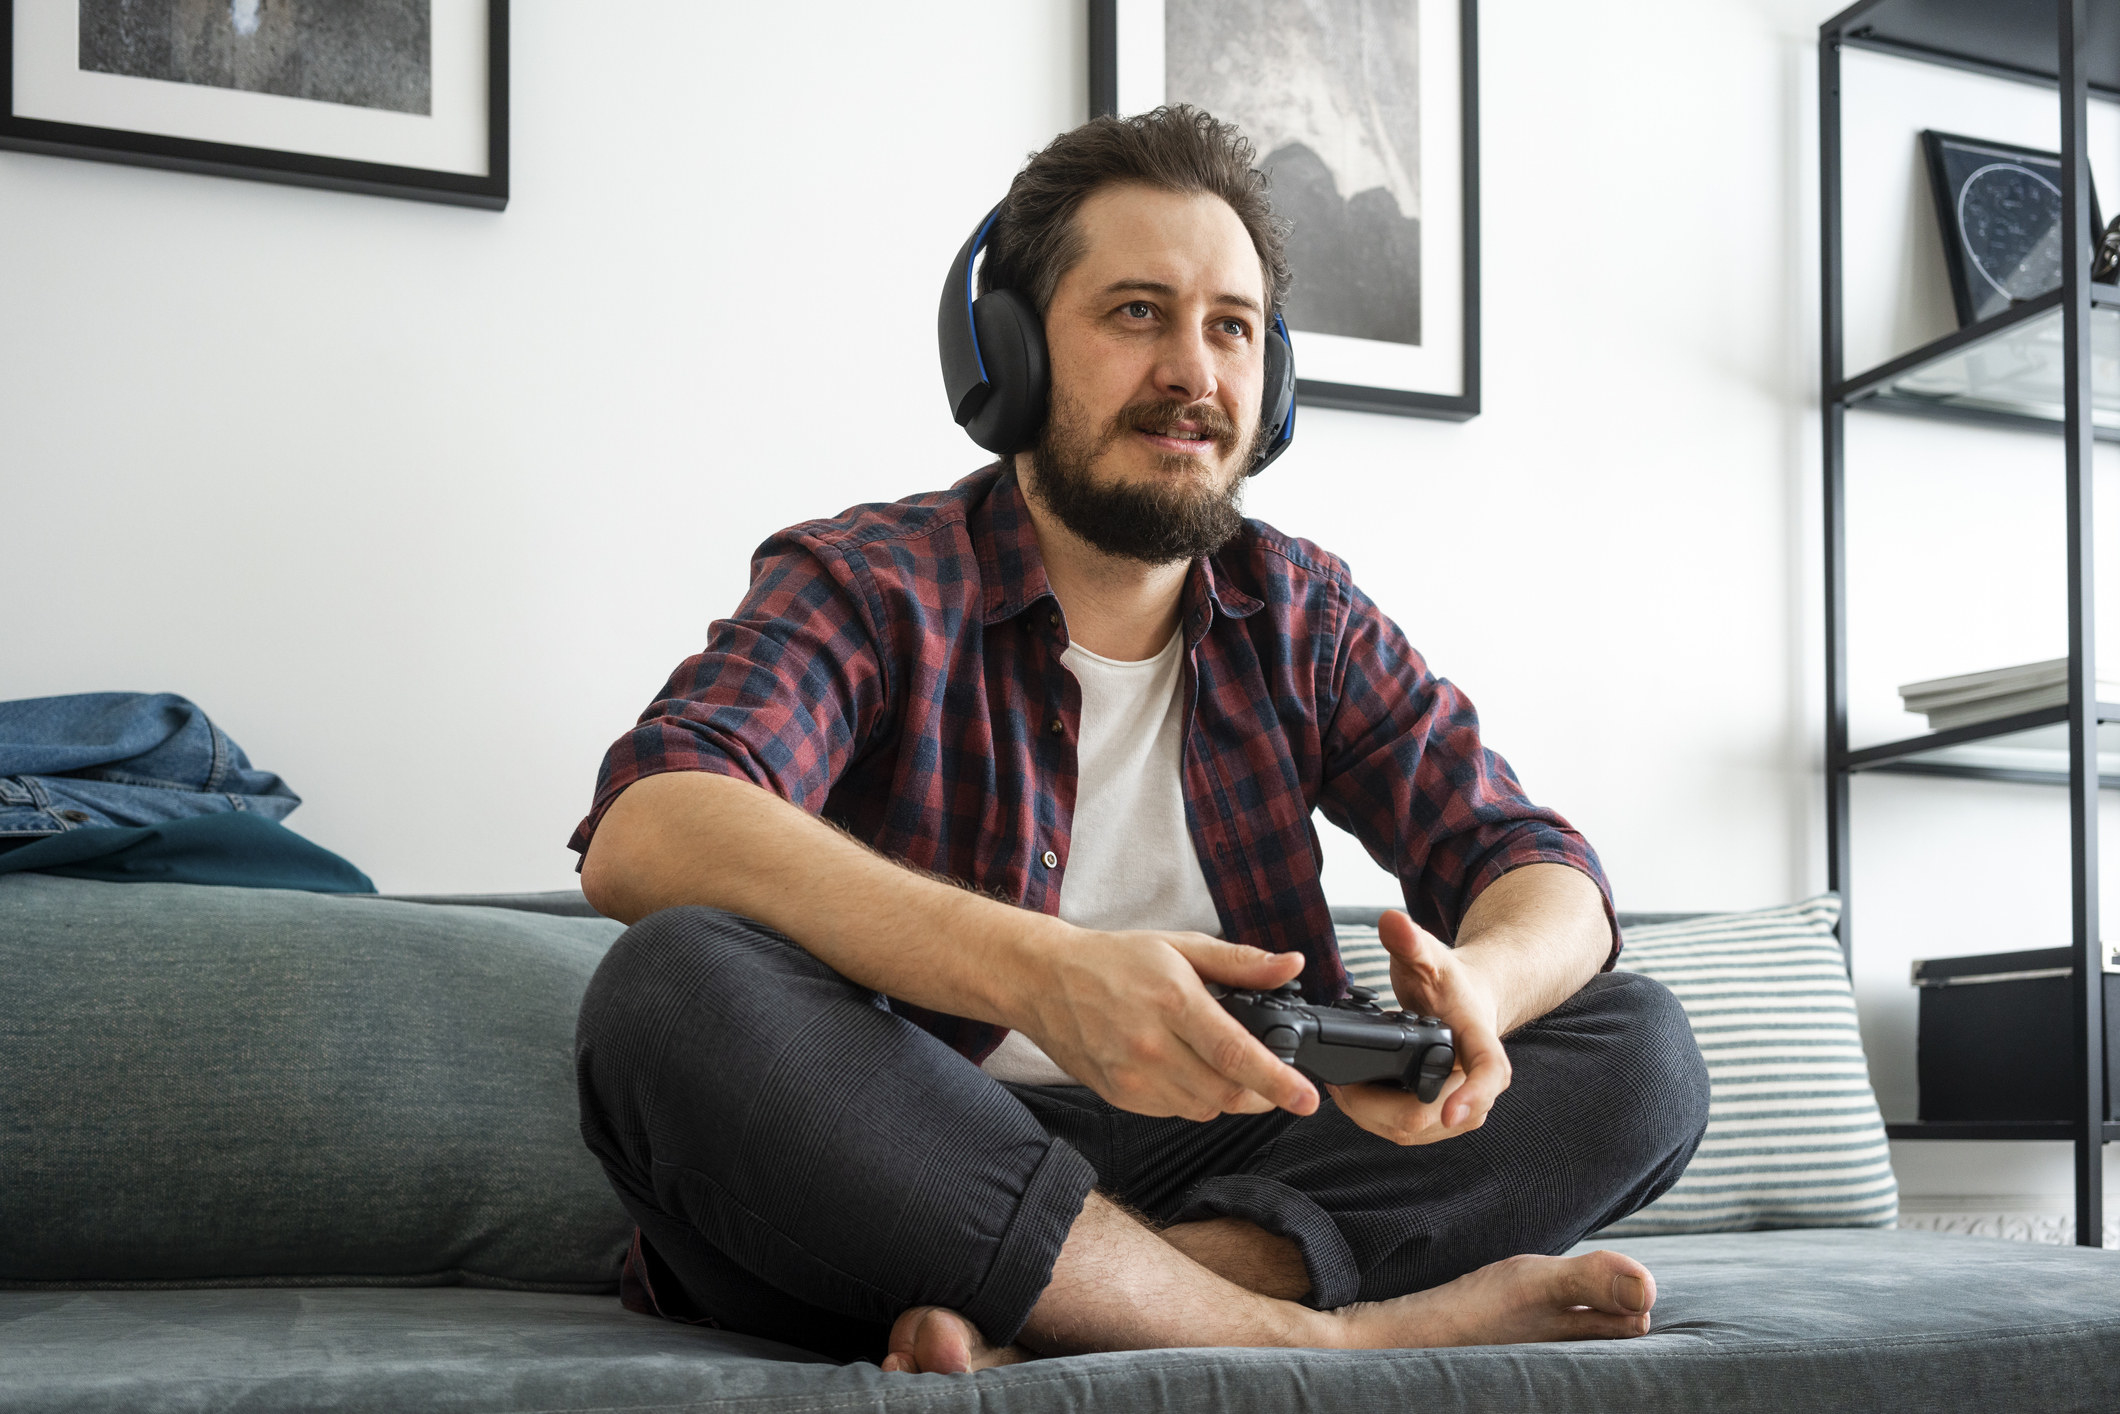 Man playing video games on couch